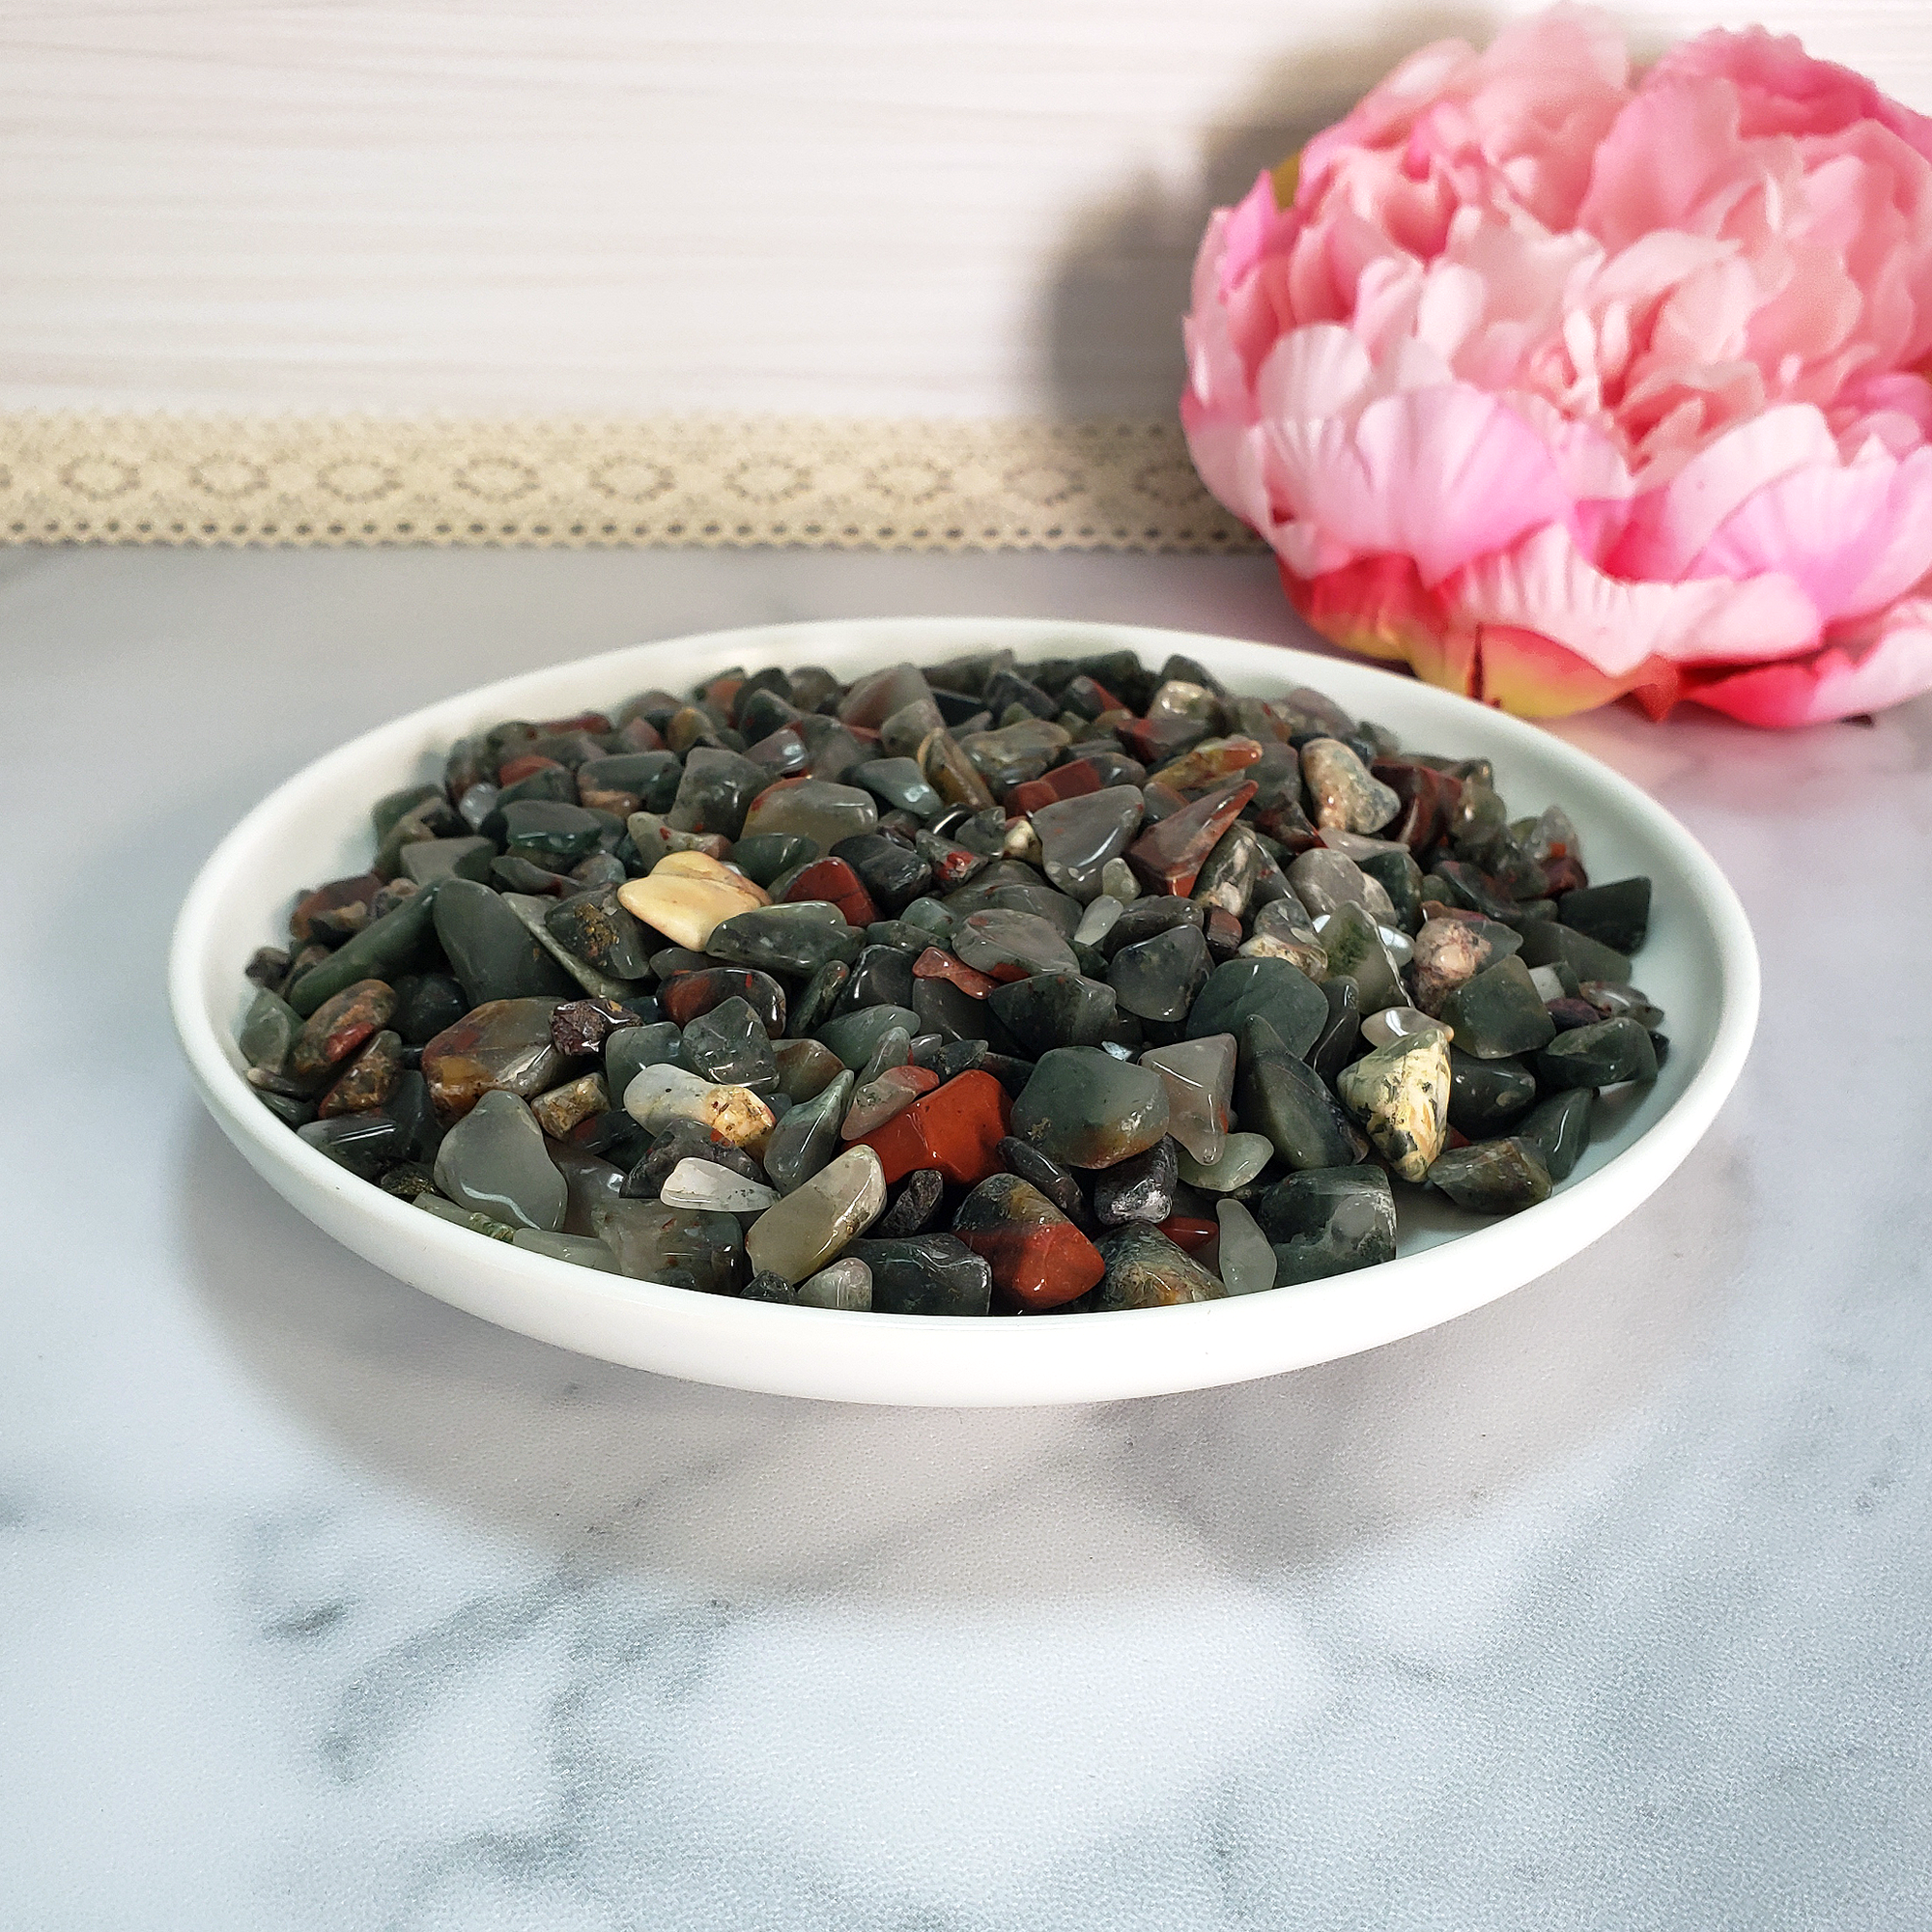 Seftonite Bloodstone Natural Gemstone Chips By the Ounce - Bloodstone Crystal Chips in White Ceramic Dish